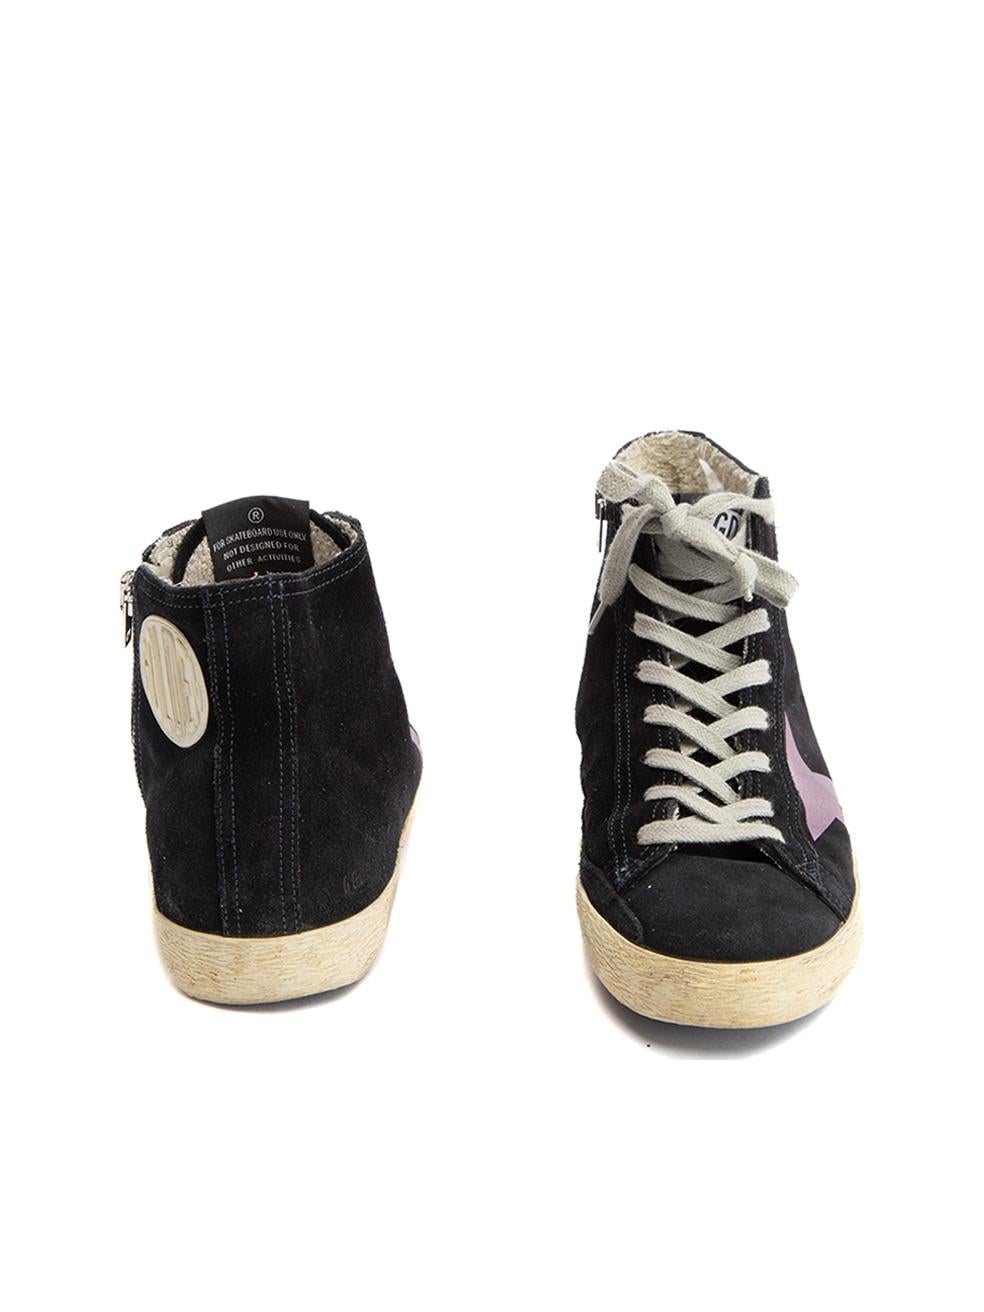 Black Suede Francy High Top Trainers Size IT 37 In Good Condition For Sale In London, GB